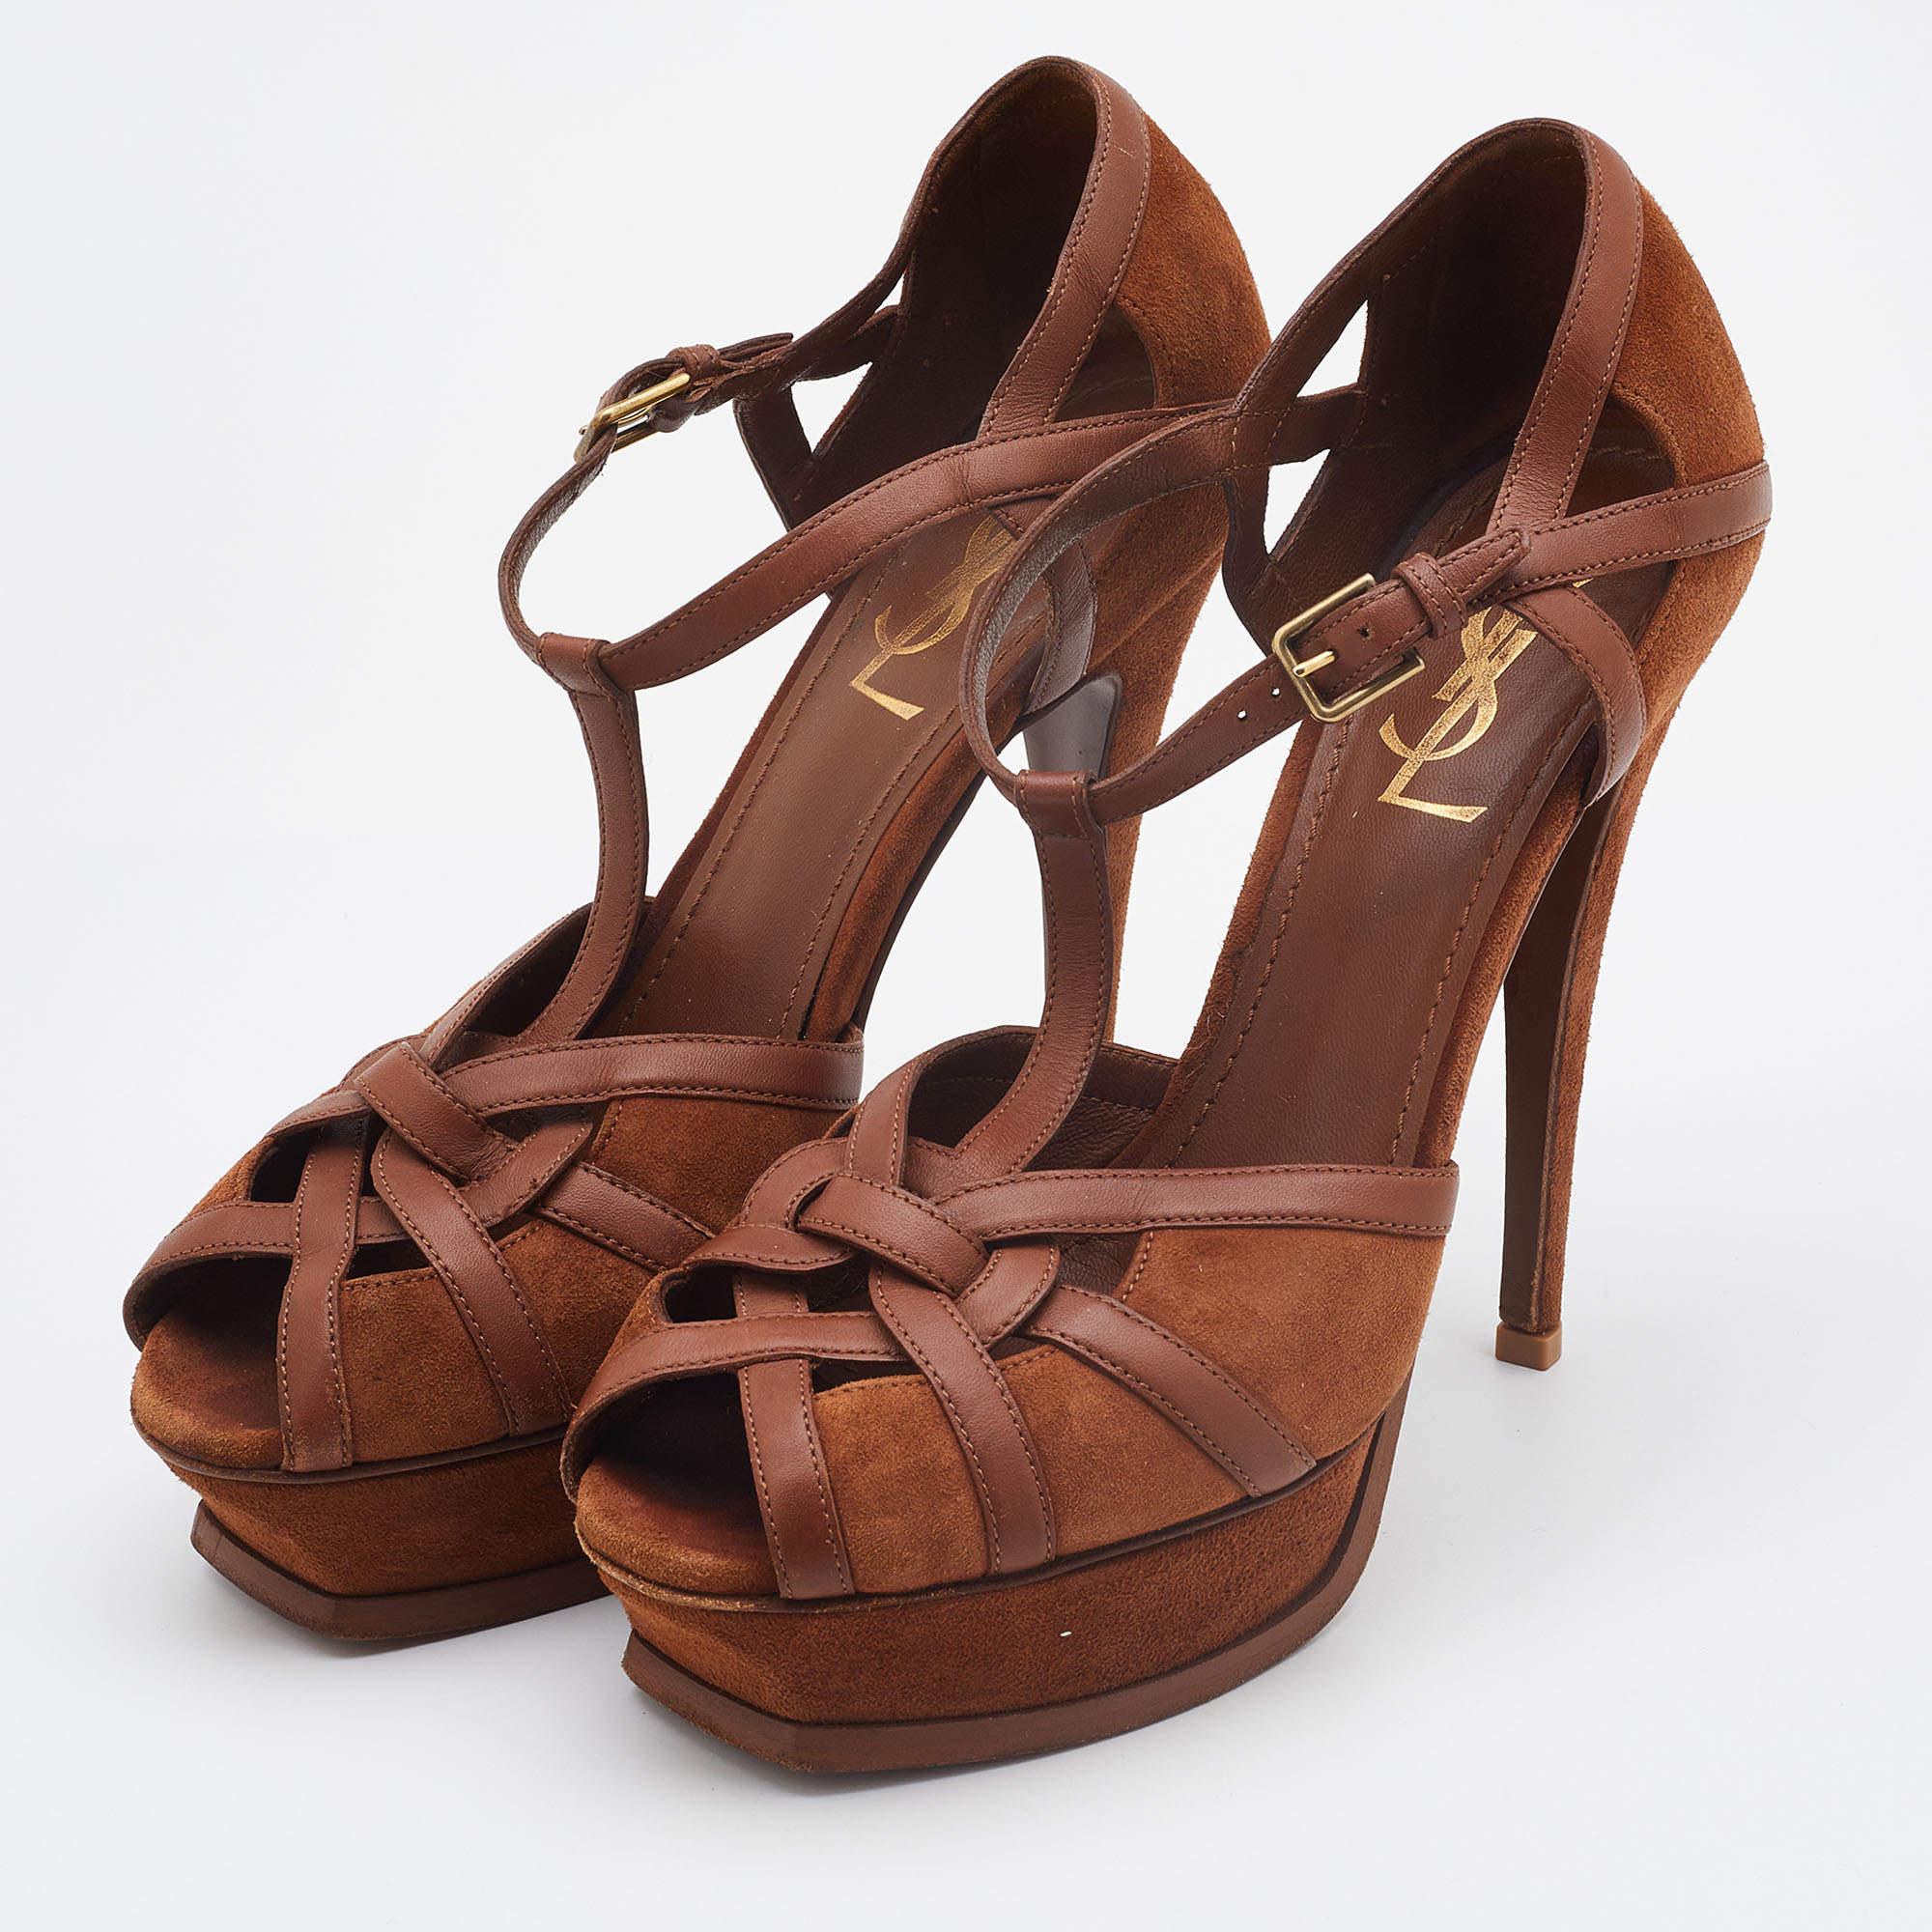 Women's Yves Saint Laurent Brown Suede and Leather Tribute Sandals Size 38.5